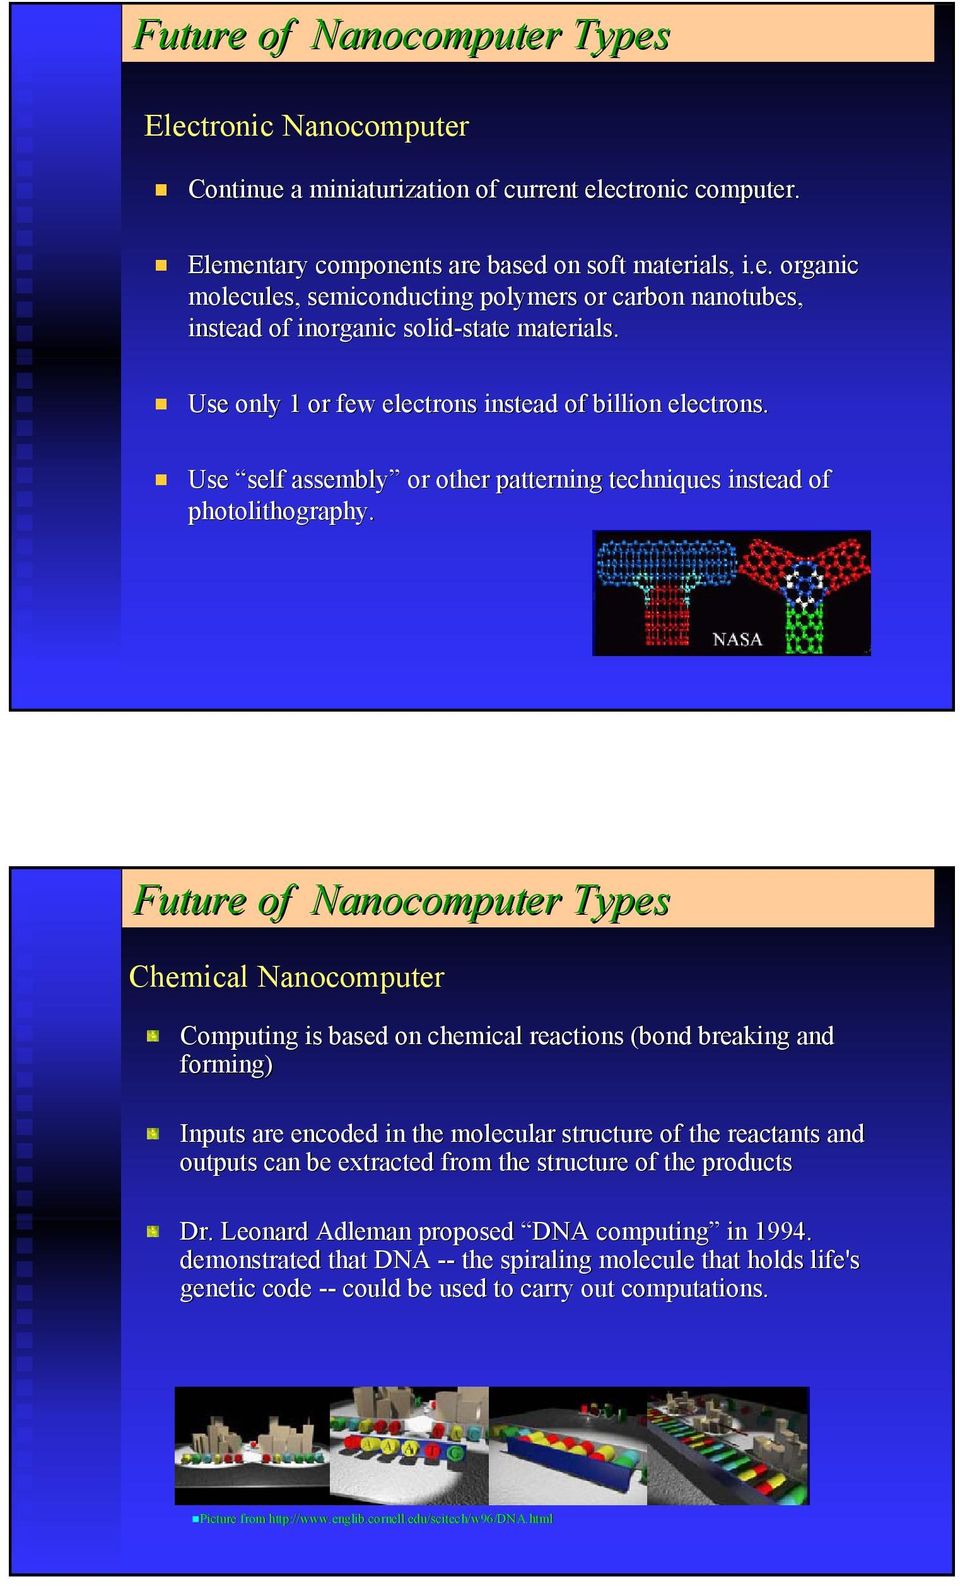 Future of Nanocomputer Types Chemical Nanocomputer Computing is based on chemical reactions (bond breaking and forming) Inputs are encoded in the molecular structure of the reactants and a outputs